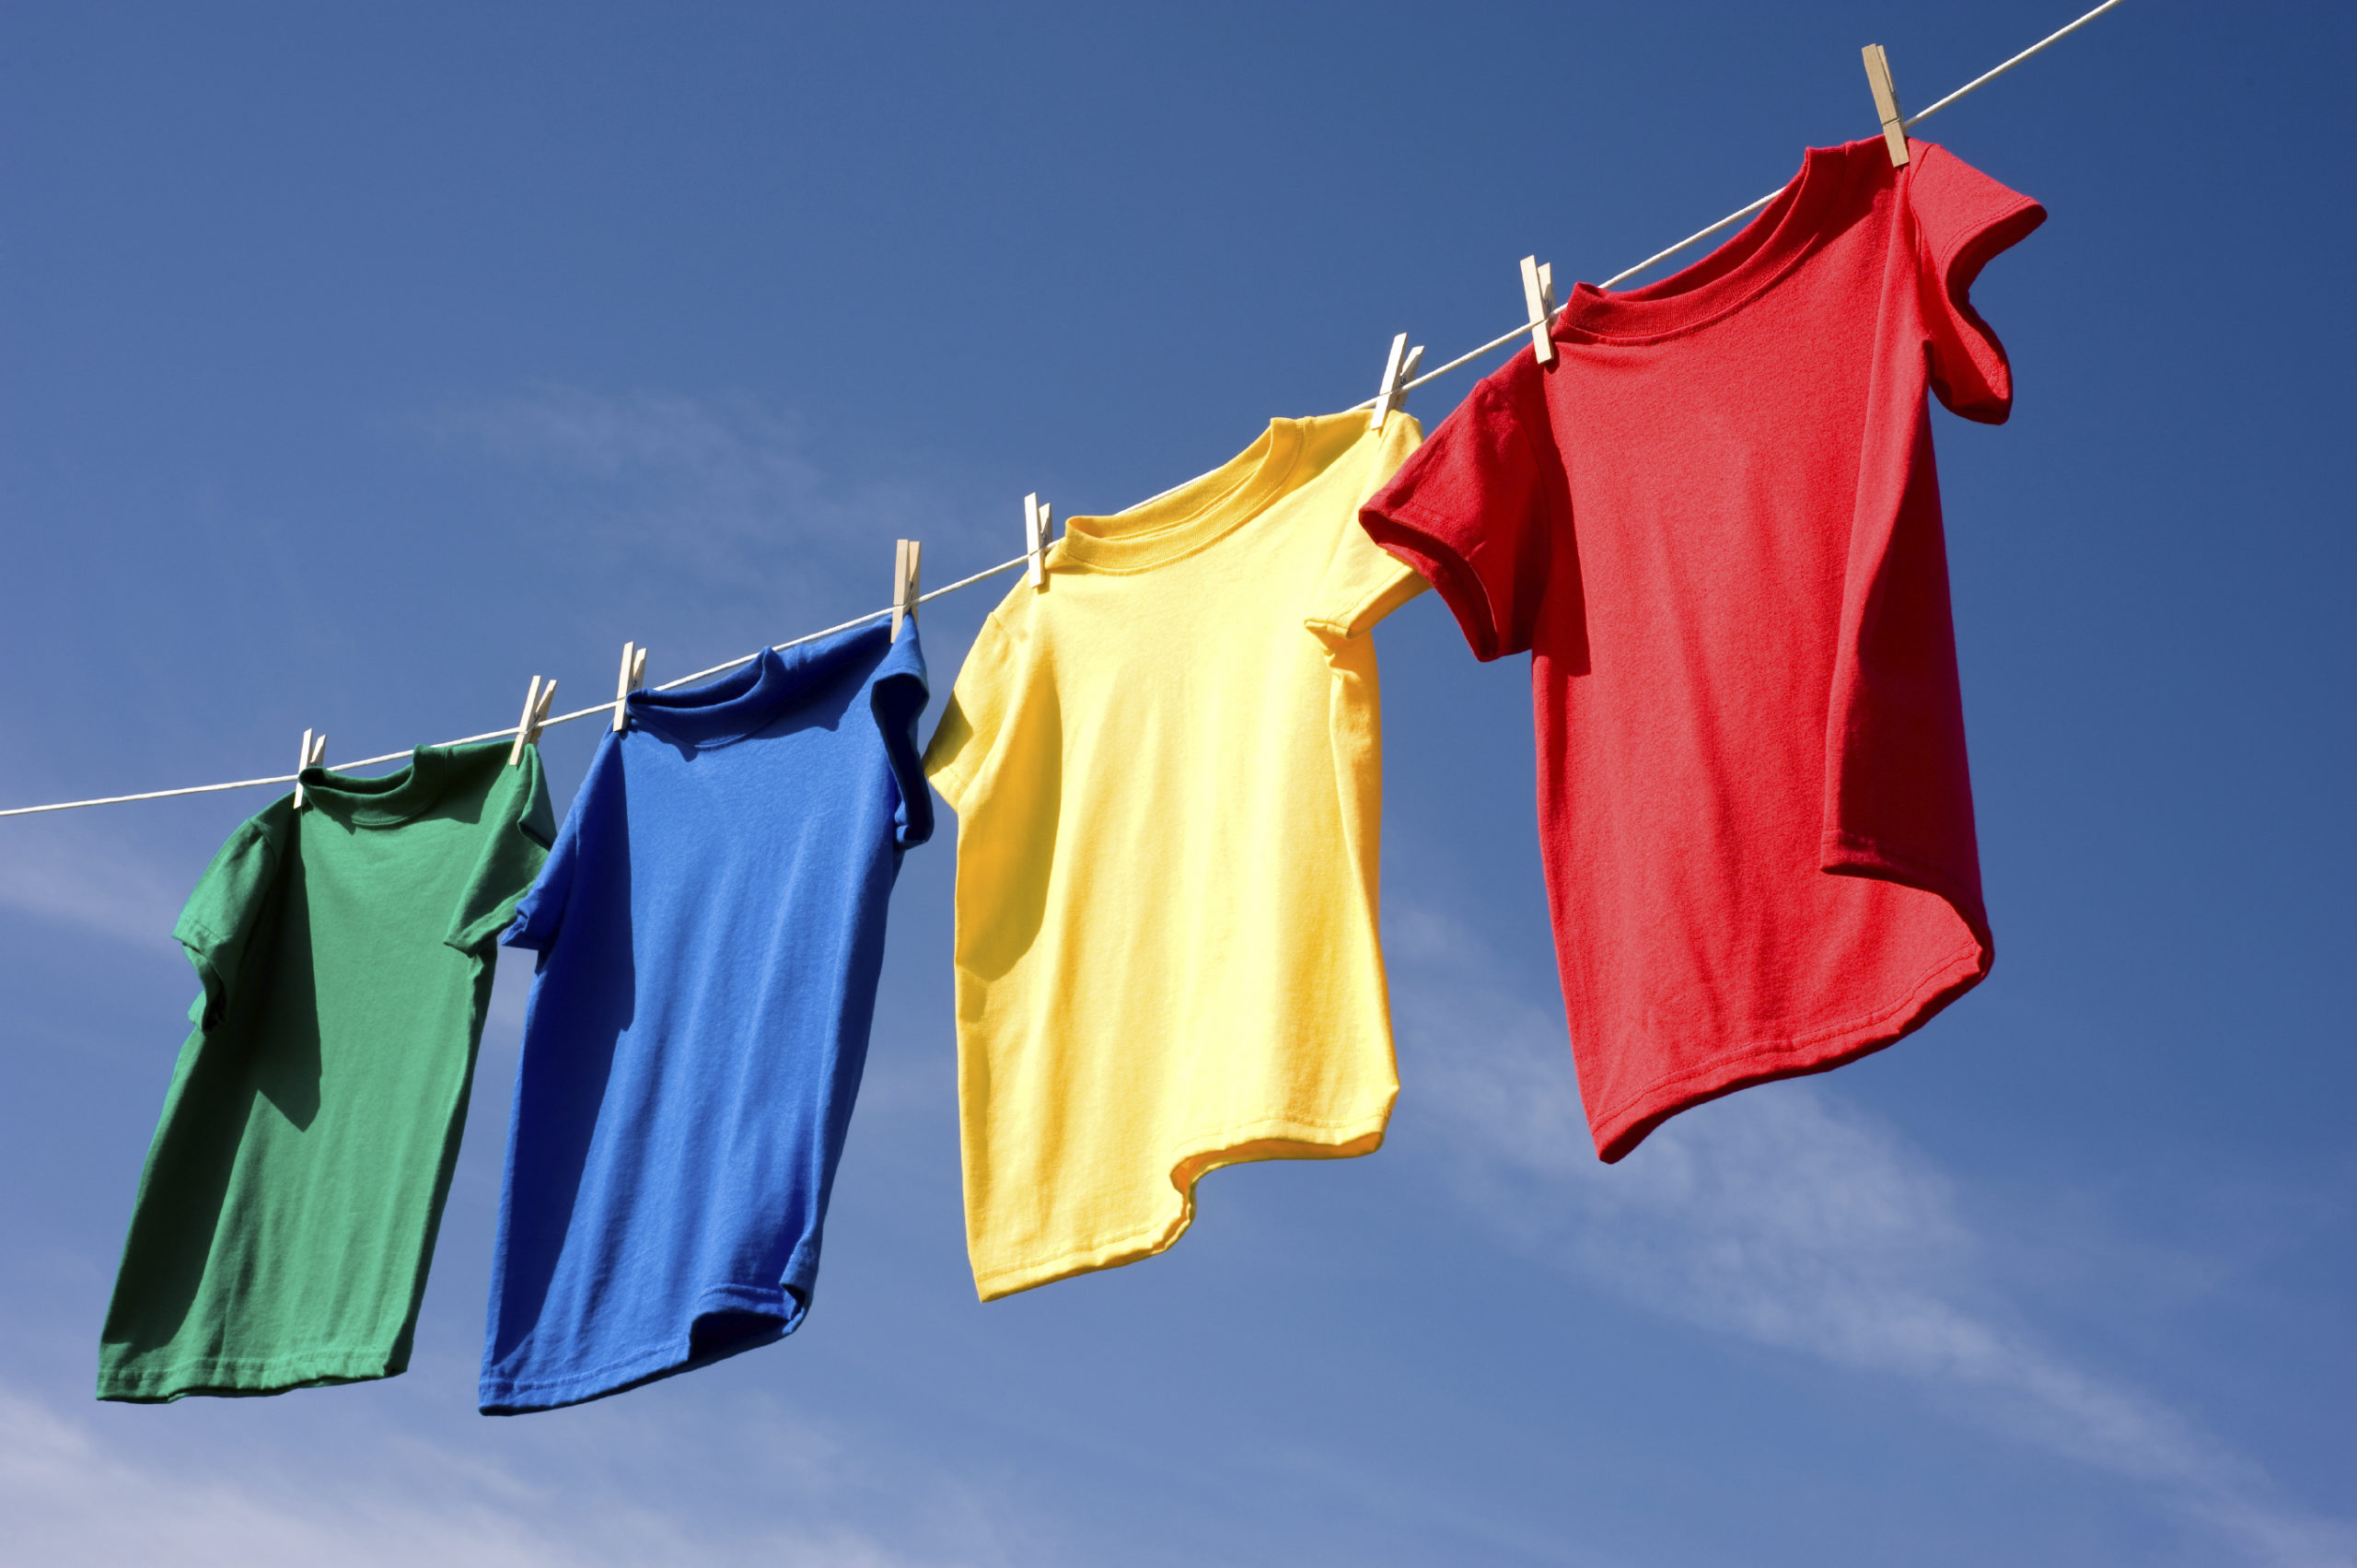 Featured image for “Dirty Laundry.”